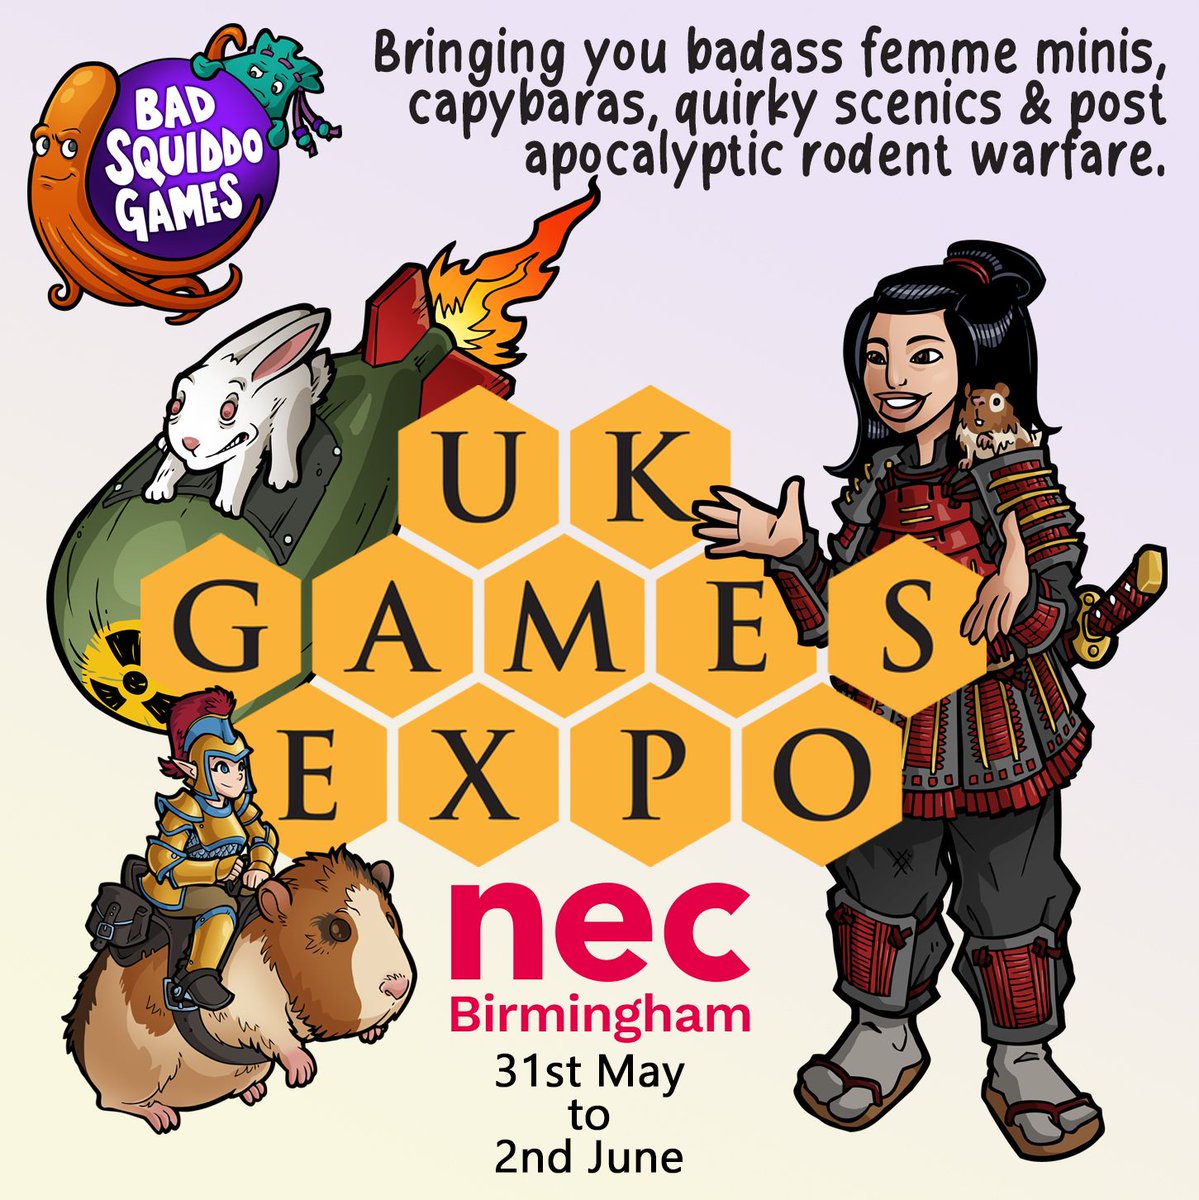 The Bad Squiddo Squad soon comes to Birmingham NEC for UK Games Expo. We'll have our many hundreds of different packs of badass femme 28mm miniatures as well as our ranges of critters (cute and terrifying) a handful of fellas, and the massive amount of fun & practical scenics!